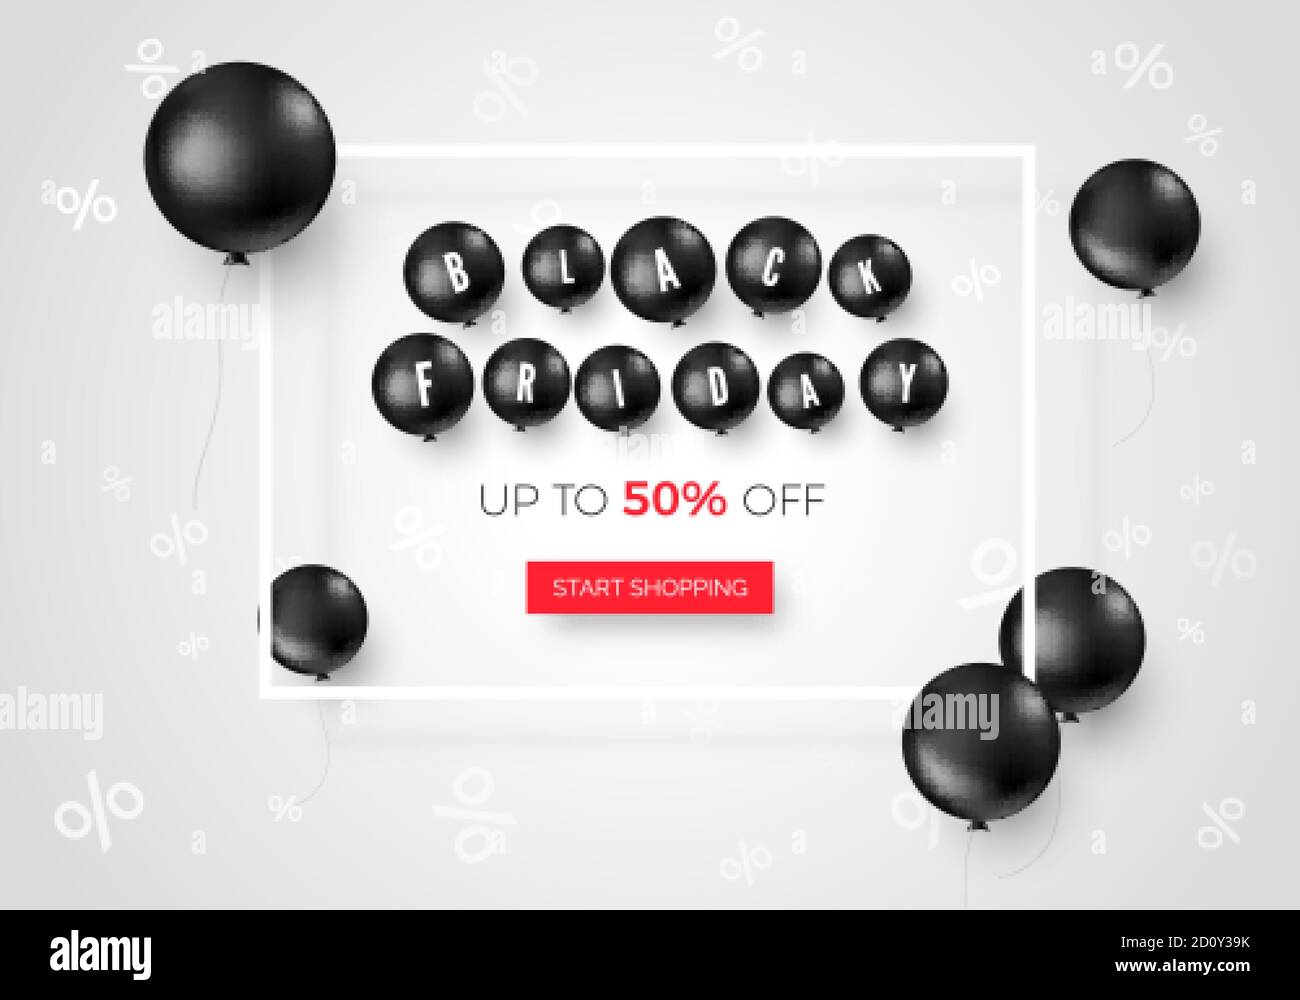 Black friday web banner with special offer. Black balloons flying around offer text. Vector Stock Vector